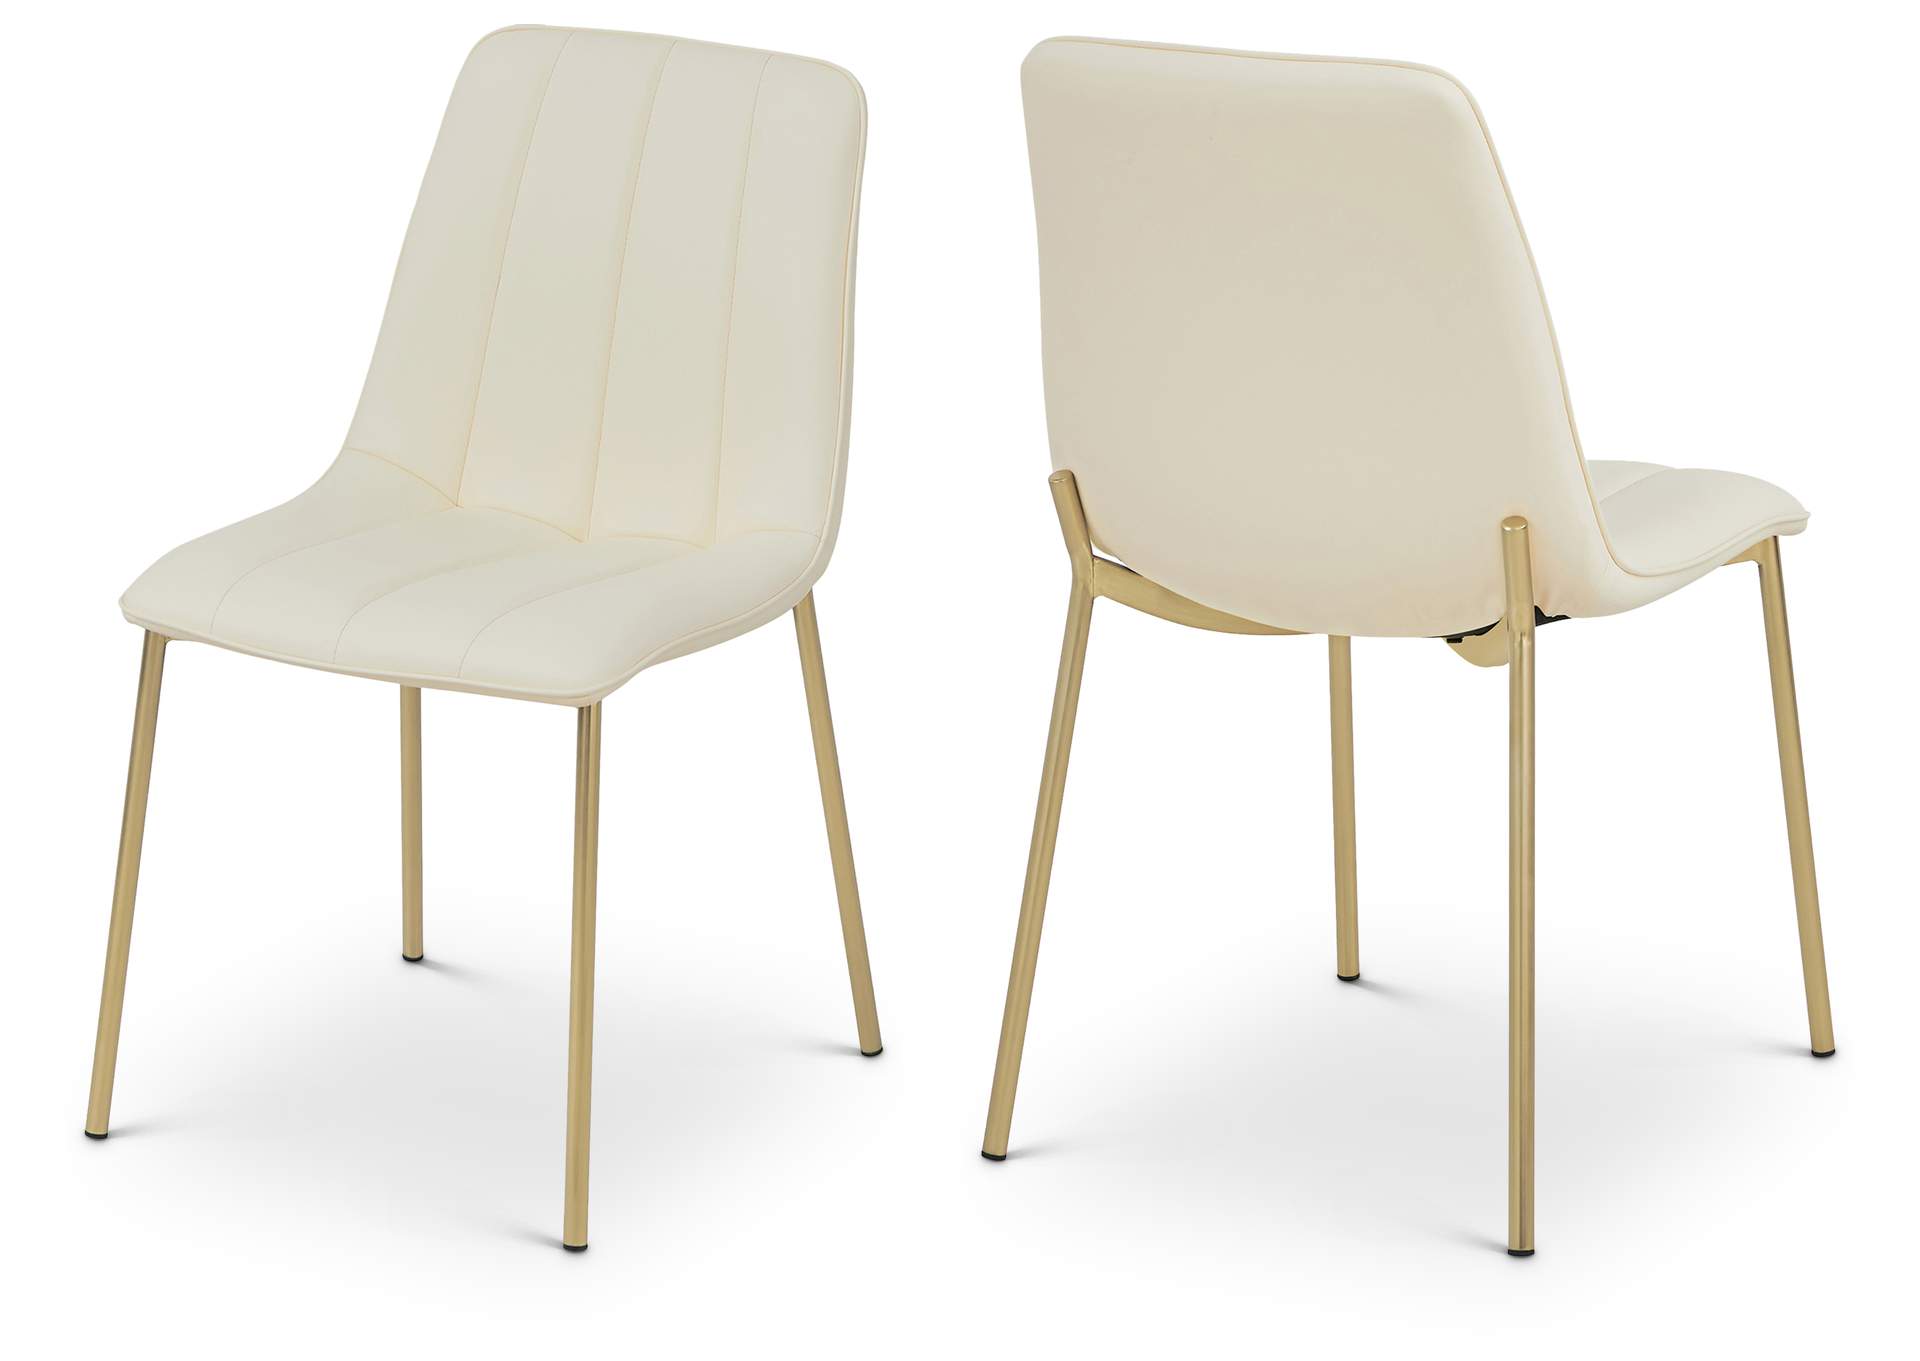 Isla Cream Faux Leather Dining Chair Set of 2,Meridian Furniture